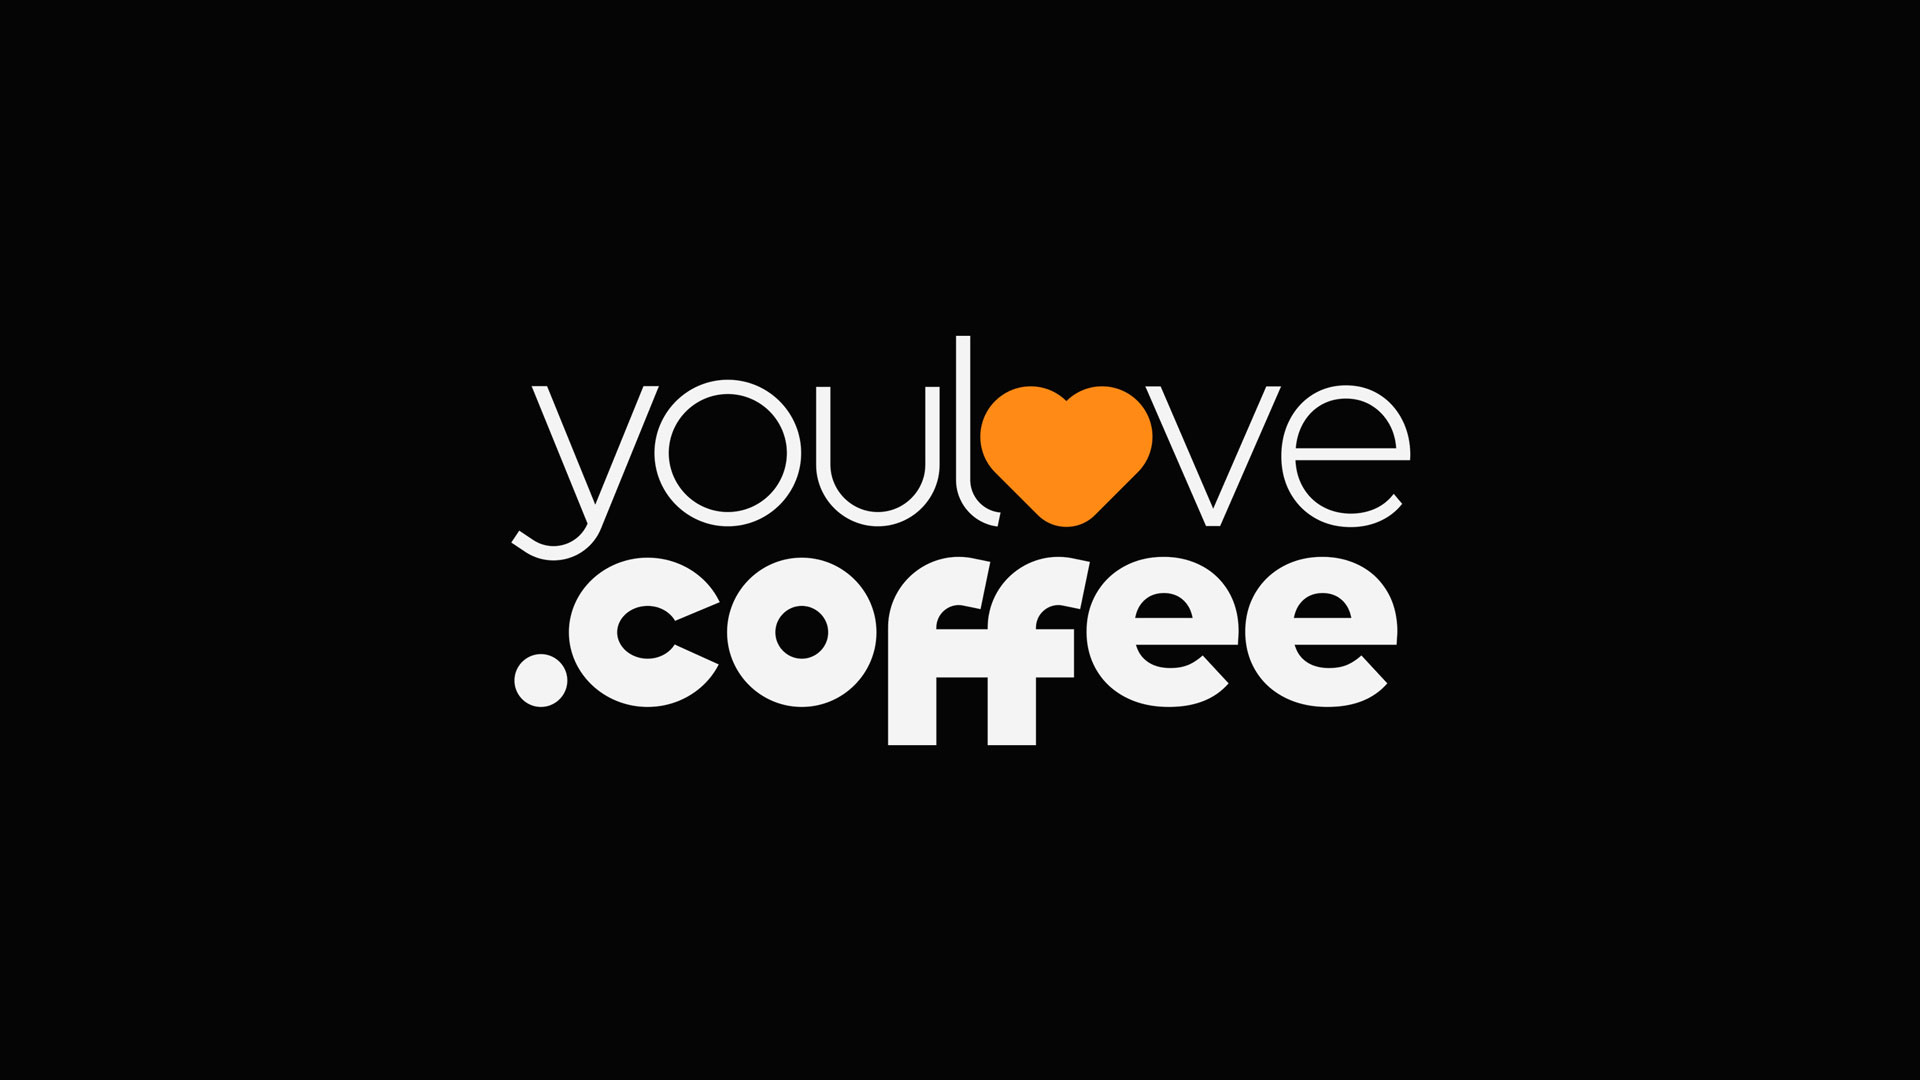 youlove.coffee